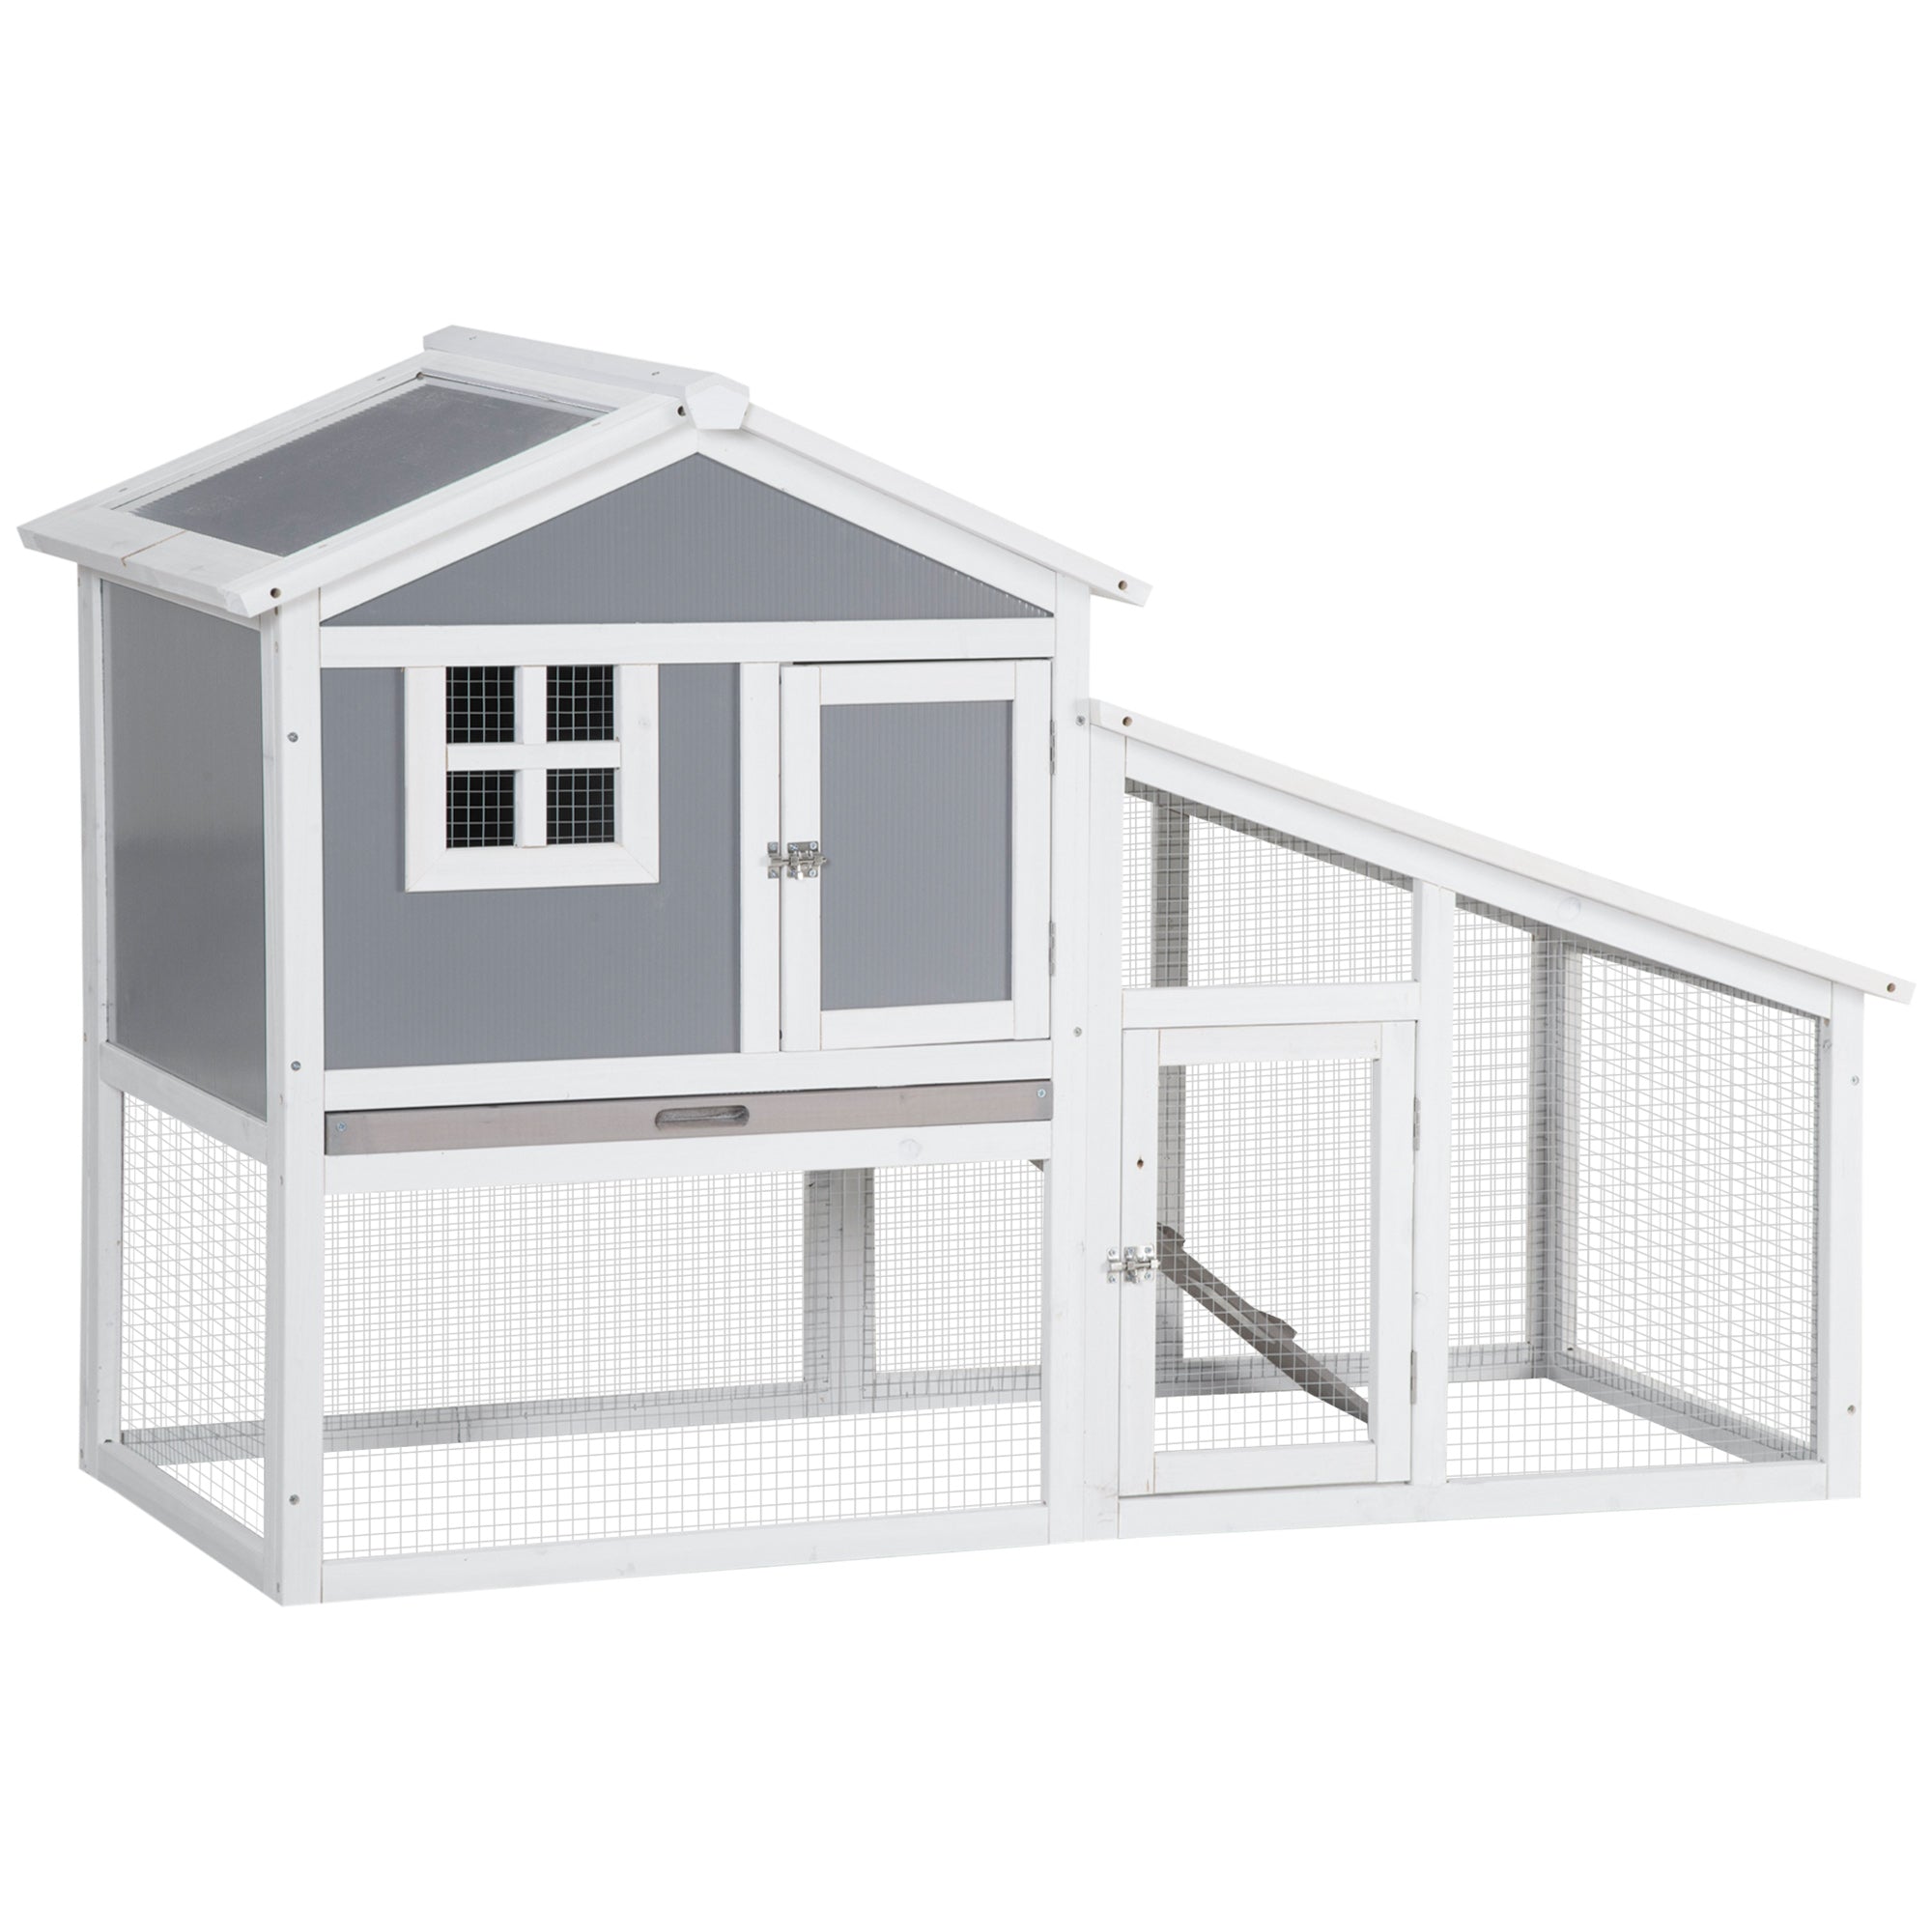 Wooden Rabbit Hutch, 2 Tier Guinea Pig Cage, Bunny Run, Small Animal House for Indoor Outdoor with Sunlight Panel Roof Slide-out Tray, 150 x 66 x 100cm, Grey, PawHut,